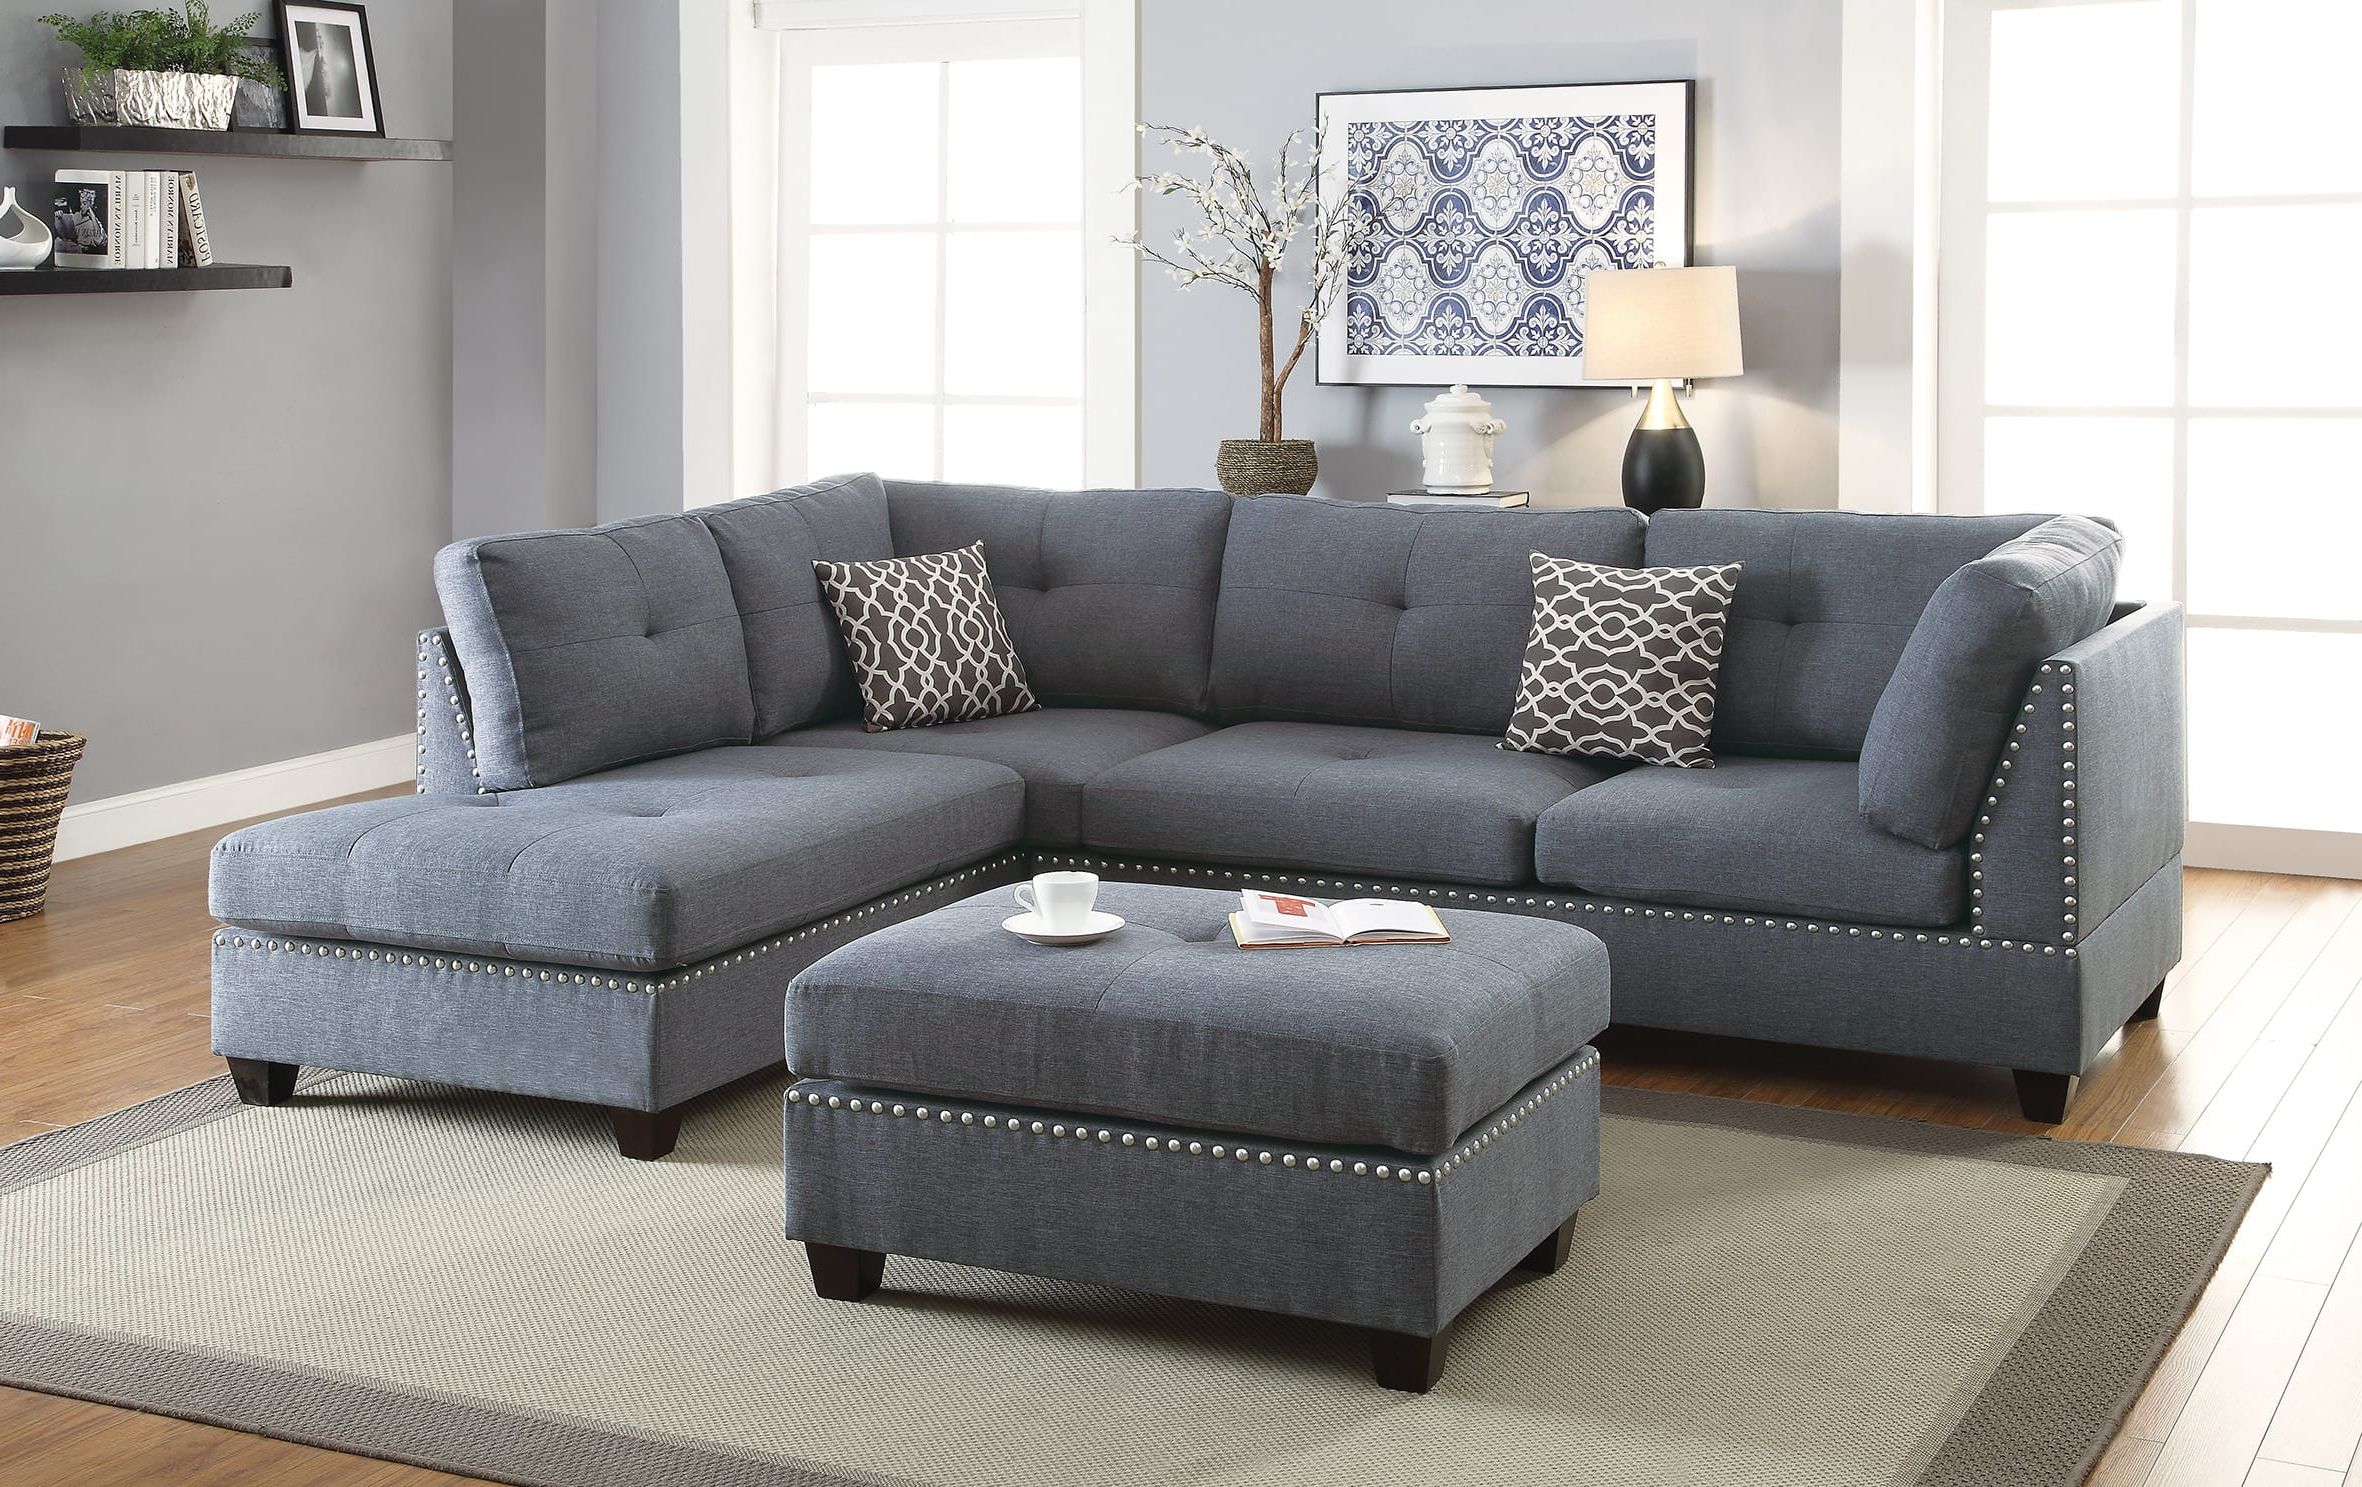 F6975 Blue Gray 3 Pcs Sectional Sofa Setpoundex Pertaining To Sofas In Bluish Grey (View 3 of 20)